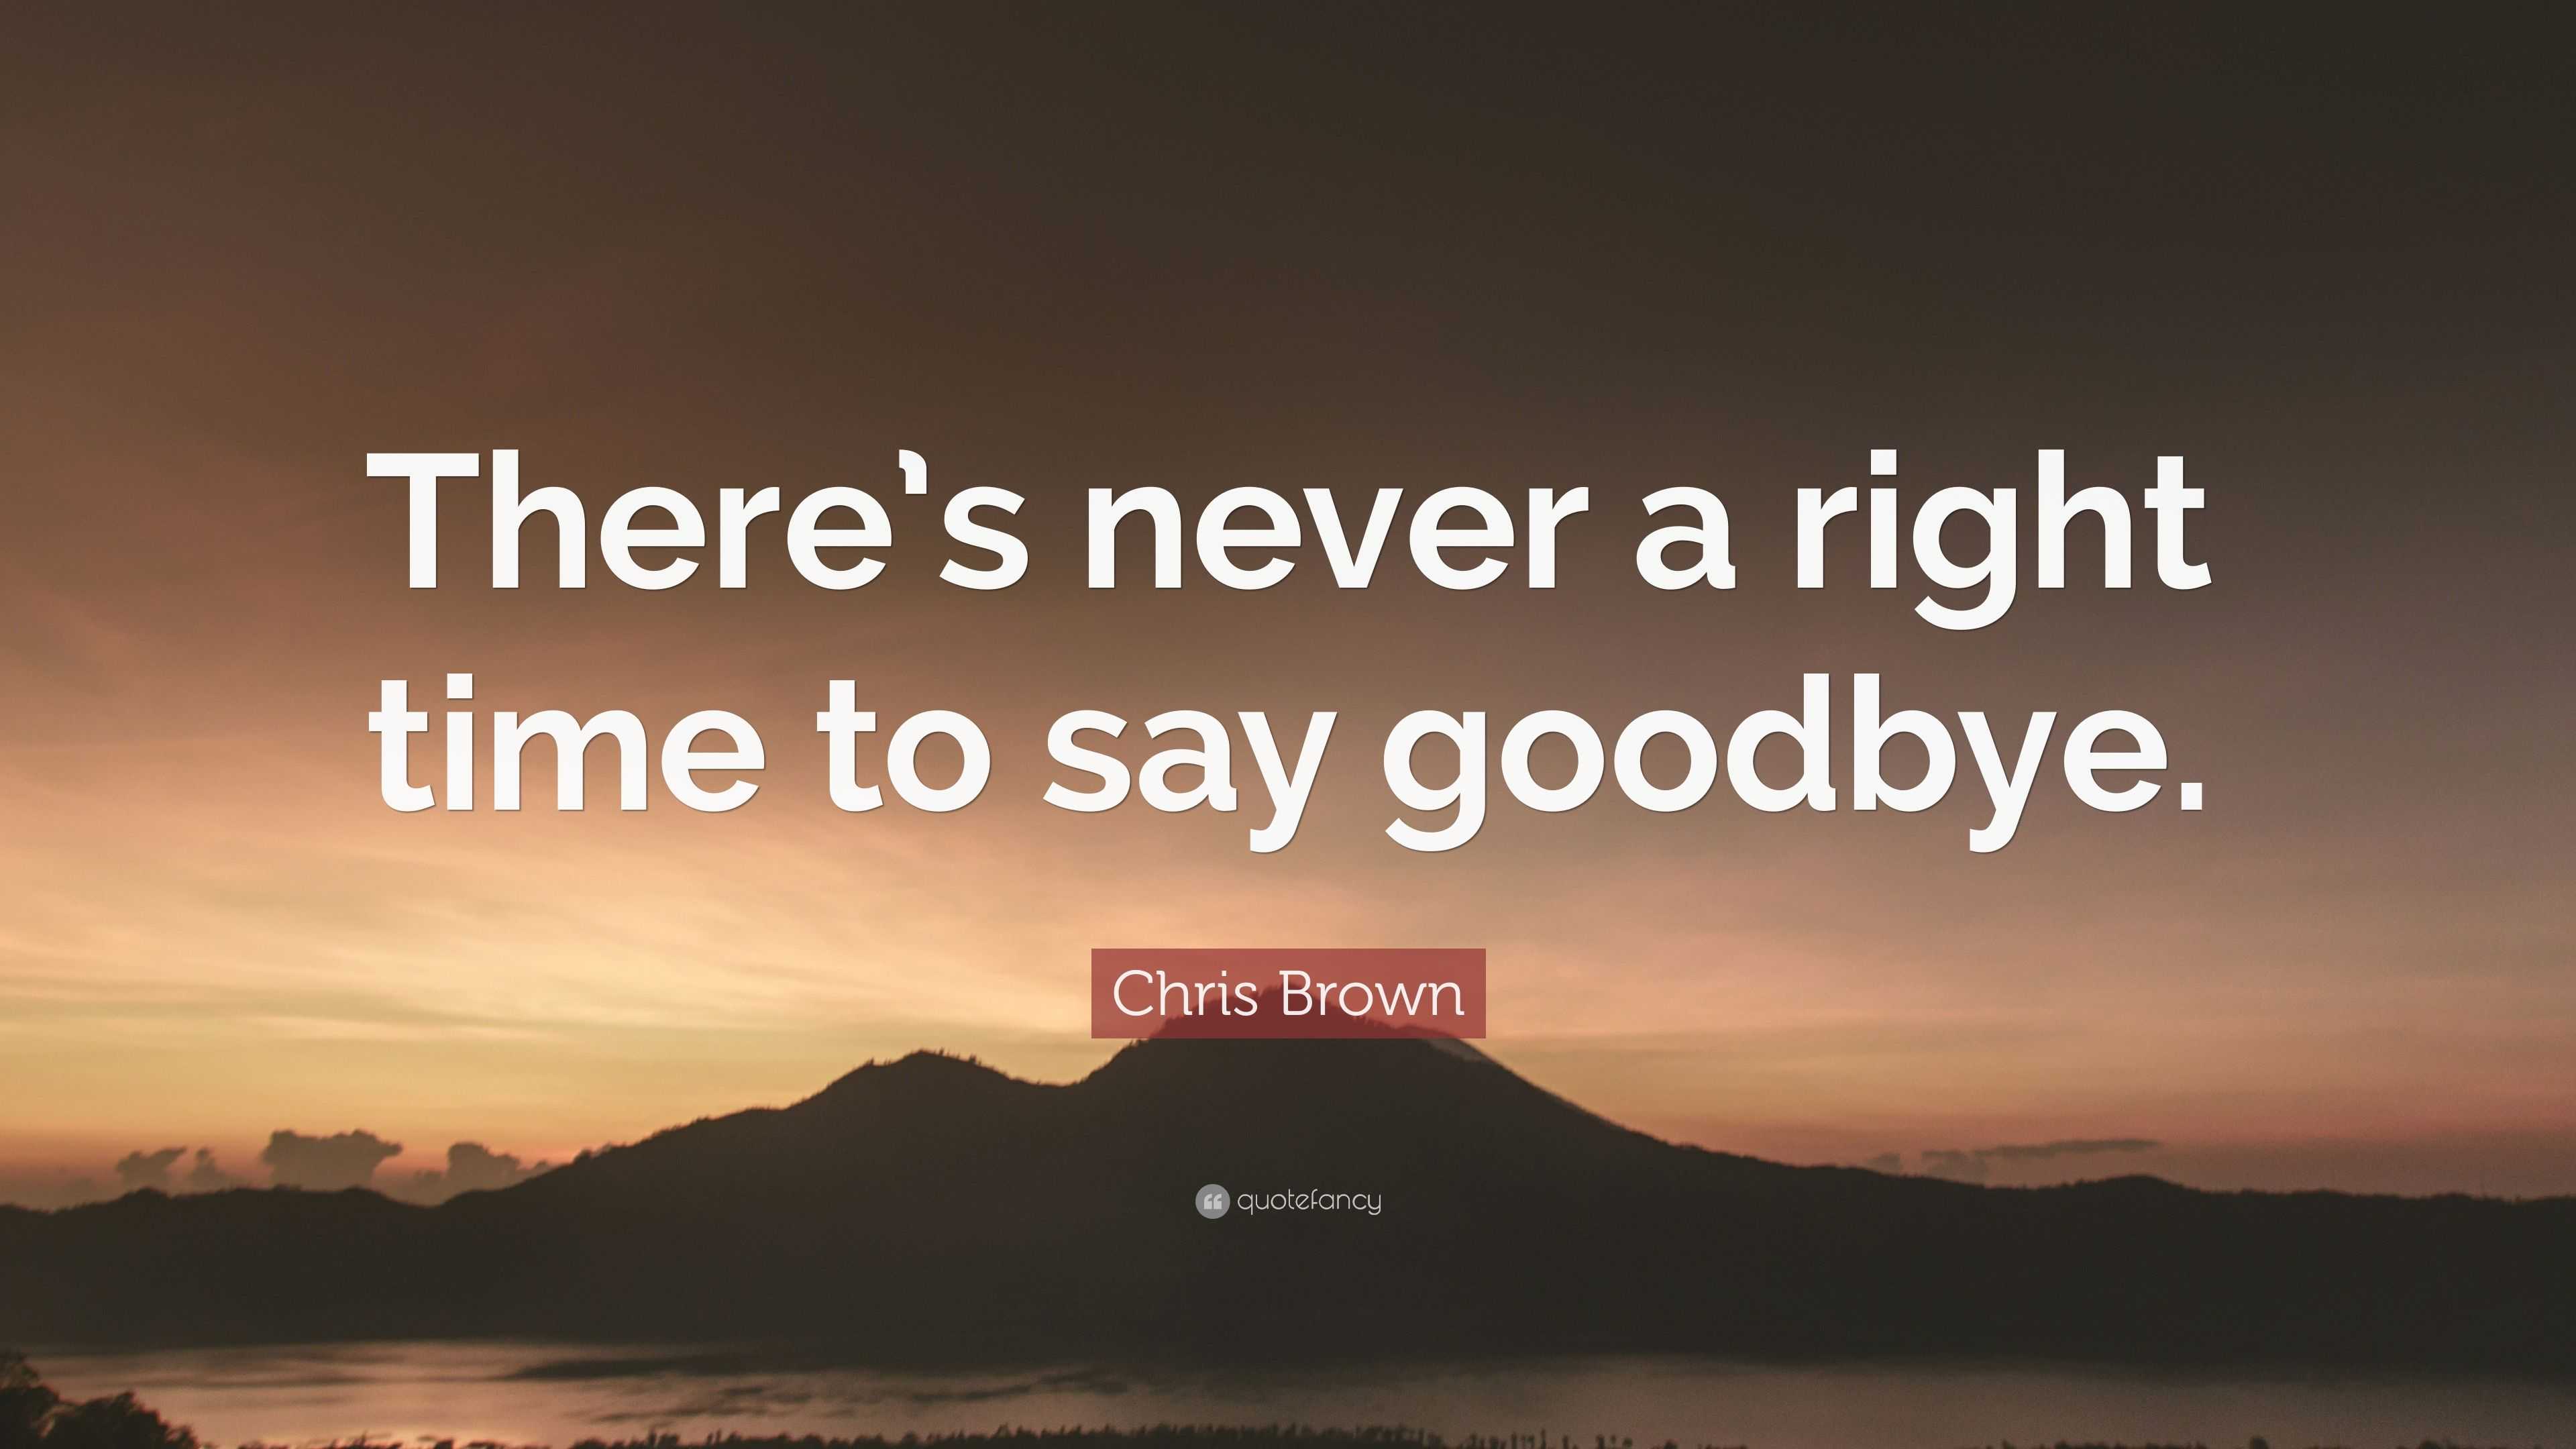 Chris Brown Quote: “There’s never a right time to say goodbye.” (20 wallpapers ...3840 x 2160